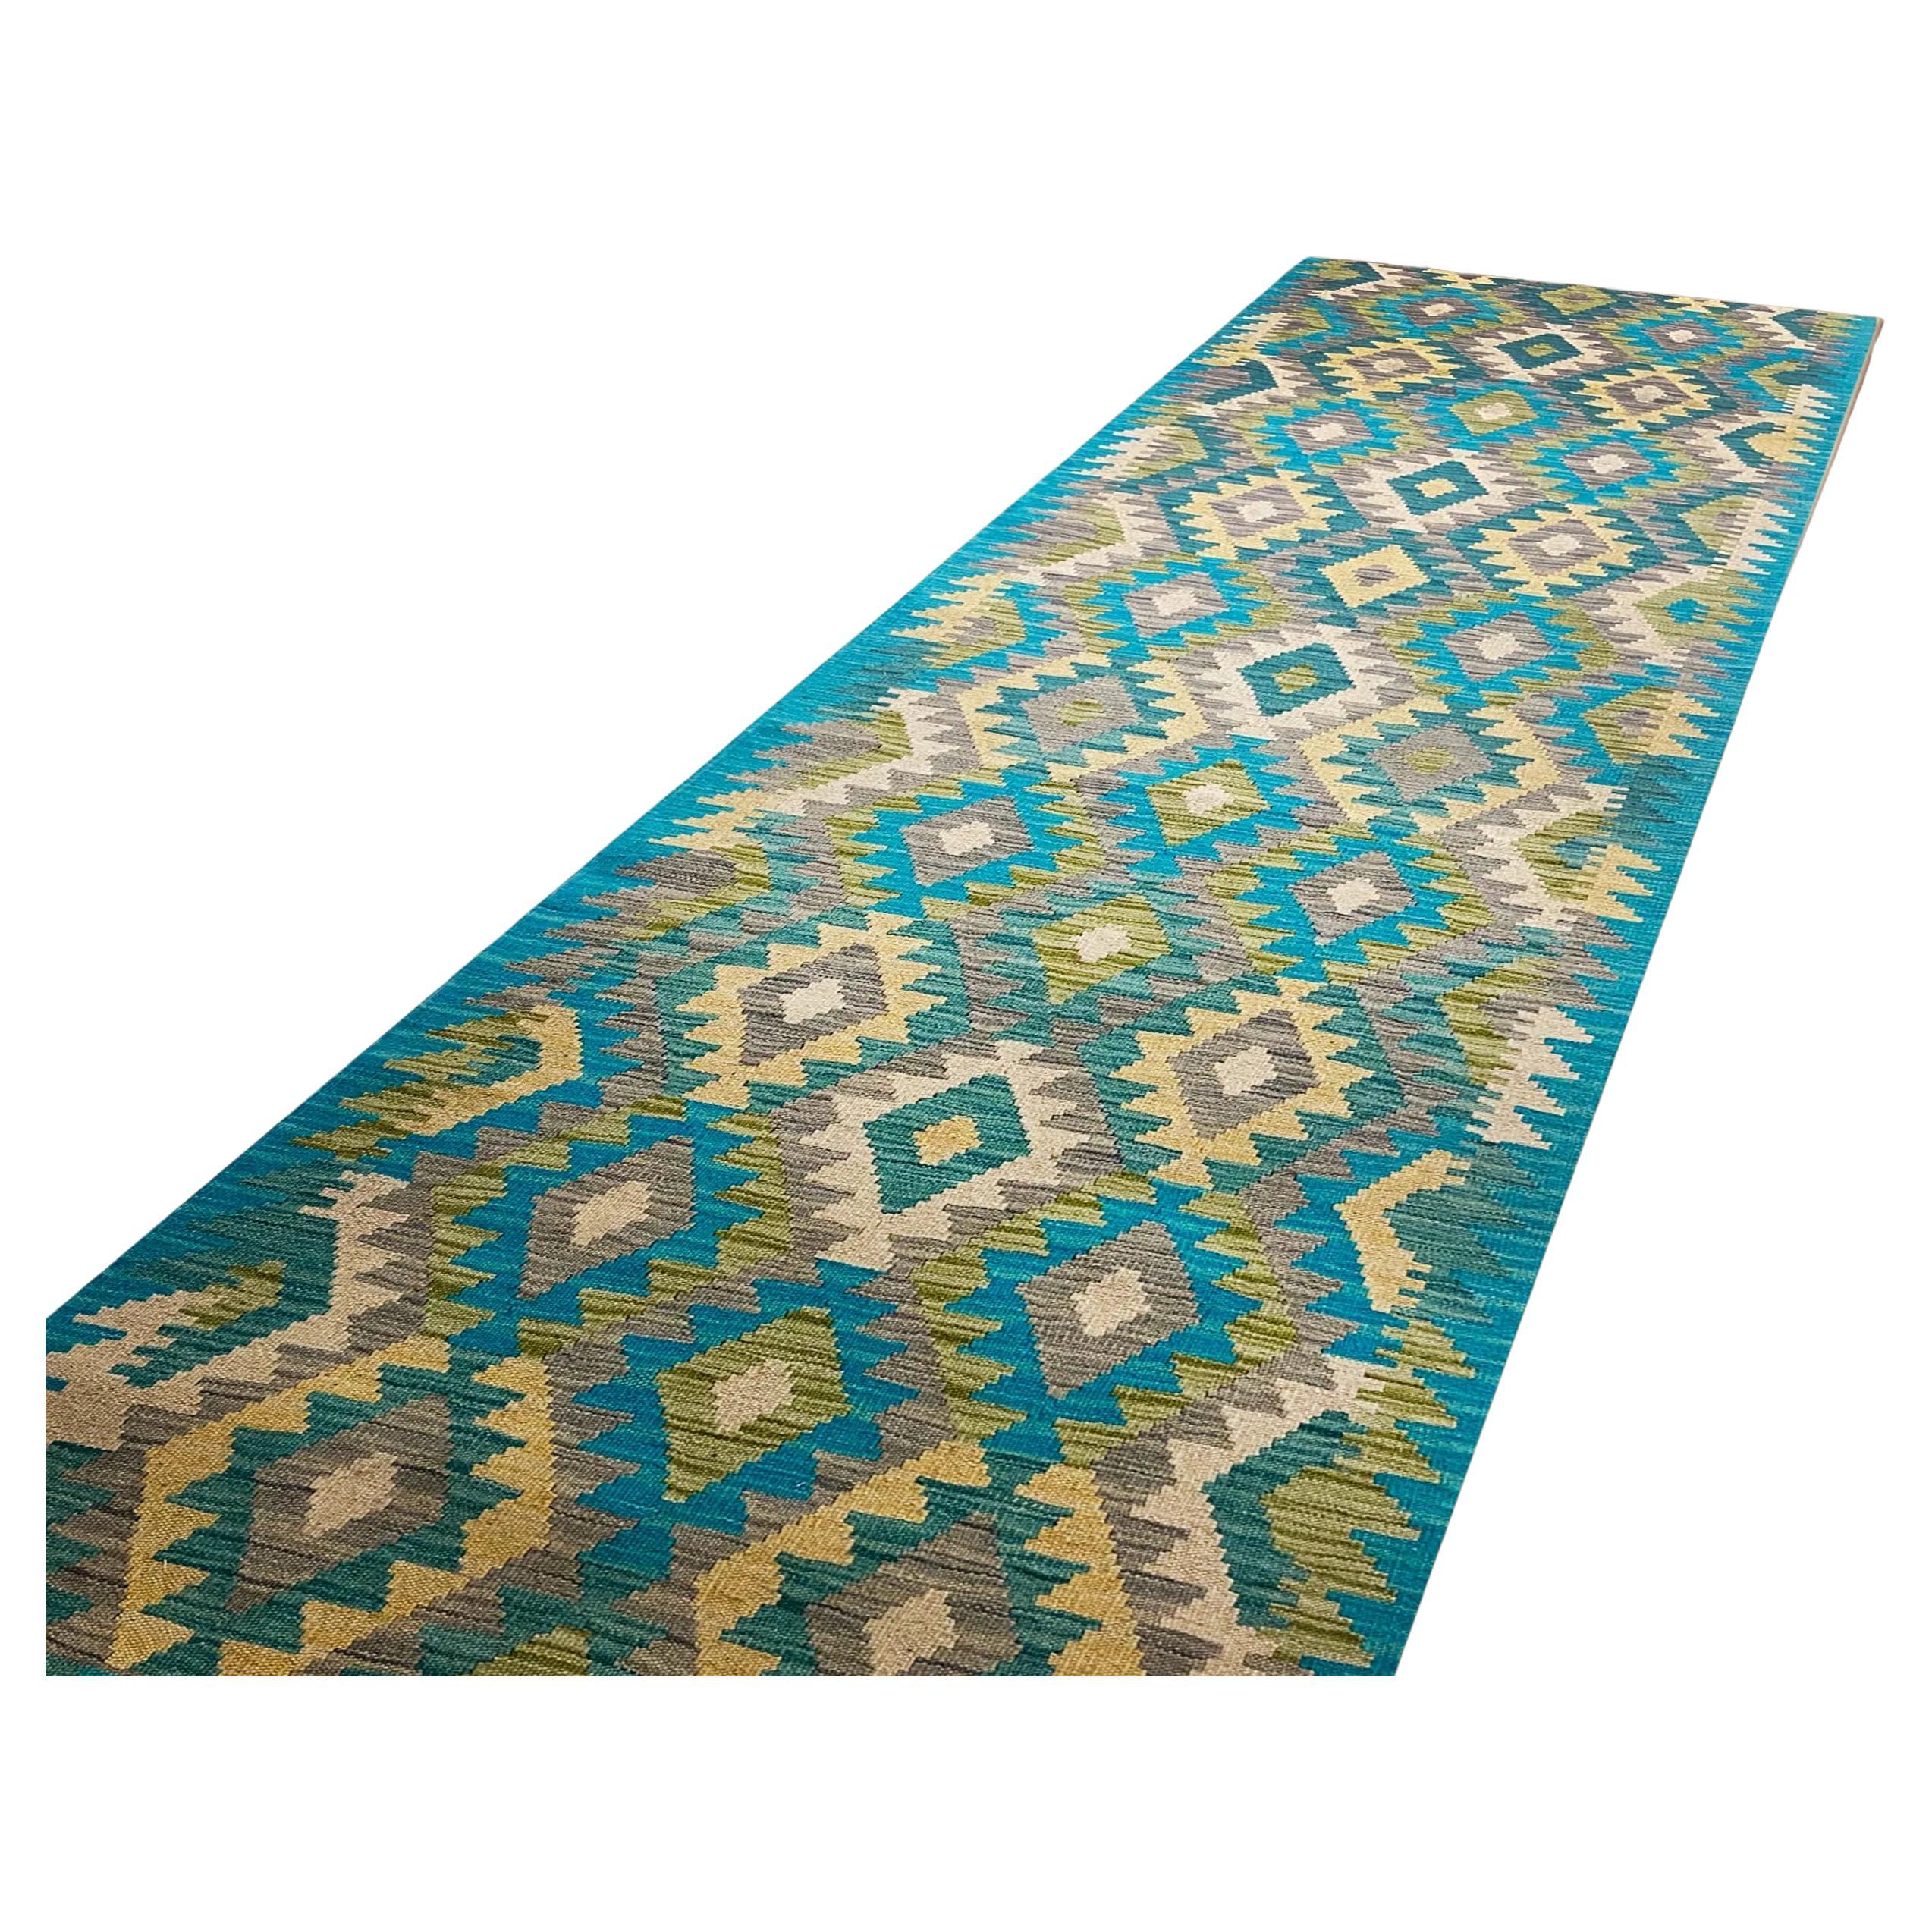 All Wool Colorful Kilim Runner 2' 9" x 16' 3" For Sale